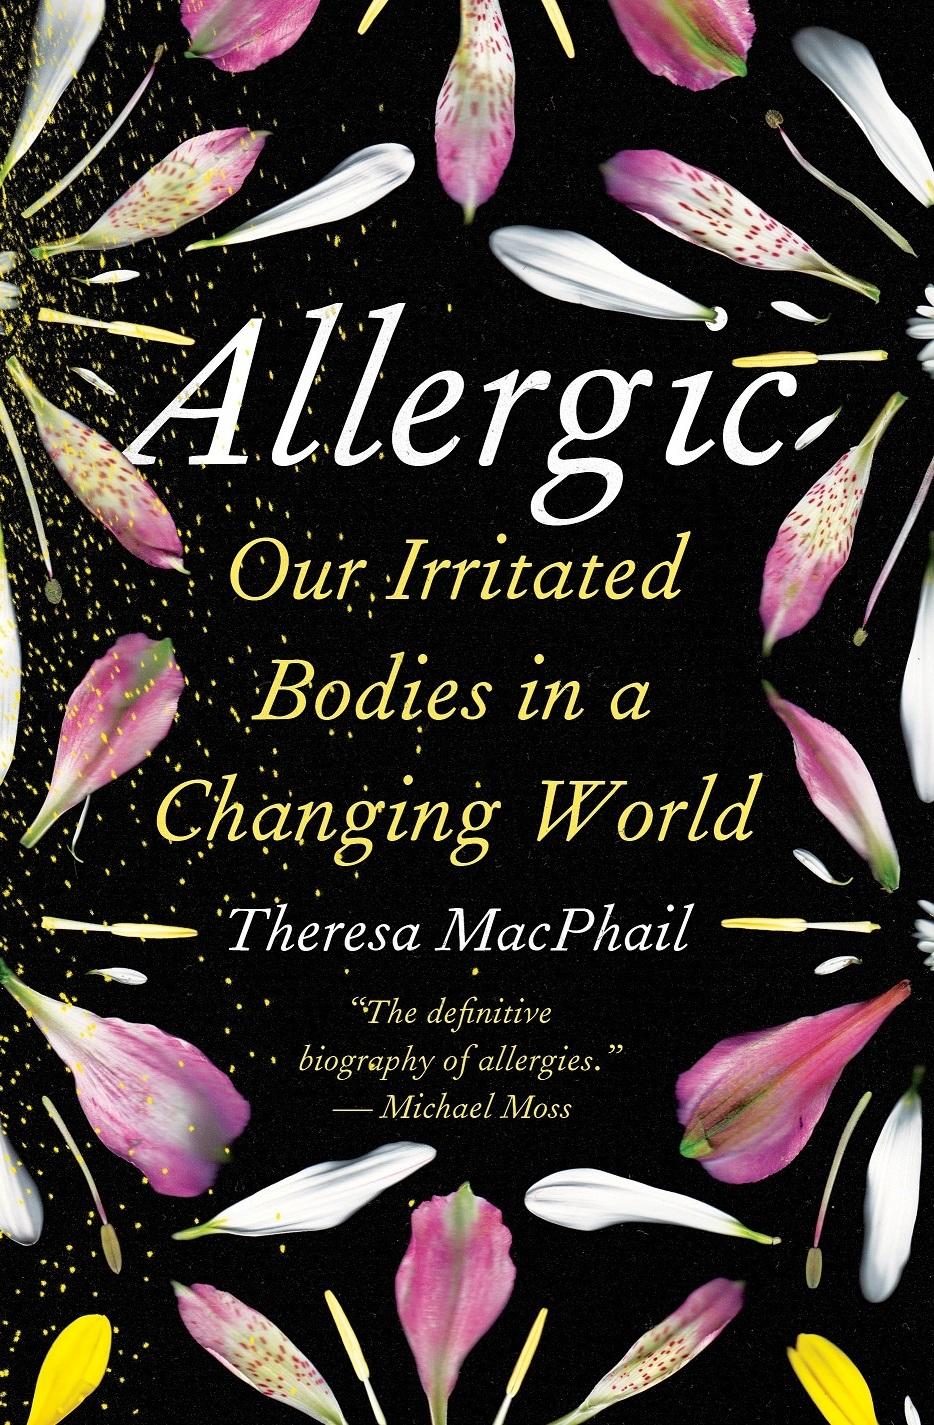 Allergic: Our Irritated Bodies in a Changing World, by Theresa MacPhail